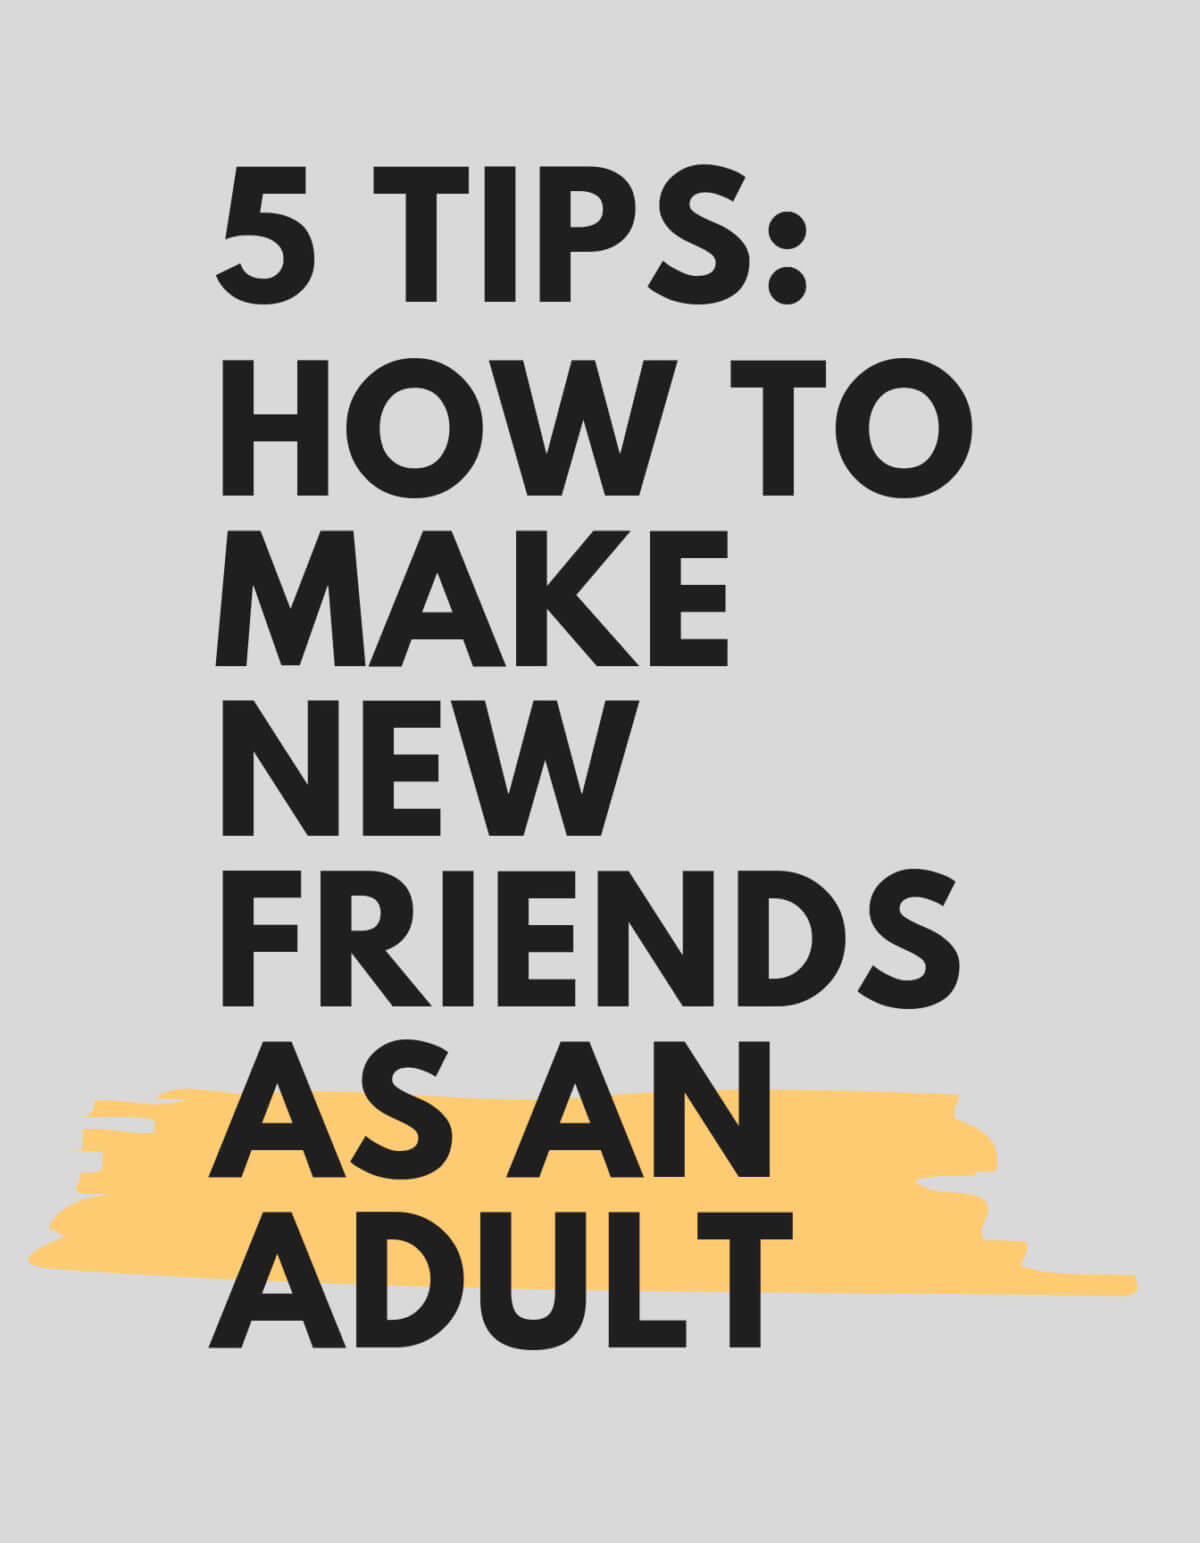 Gray background with text - 5 tips: how to make new friends as an adult